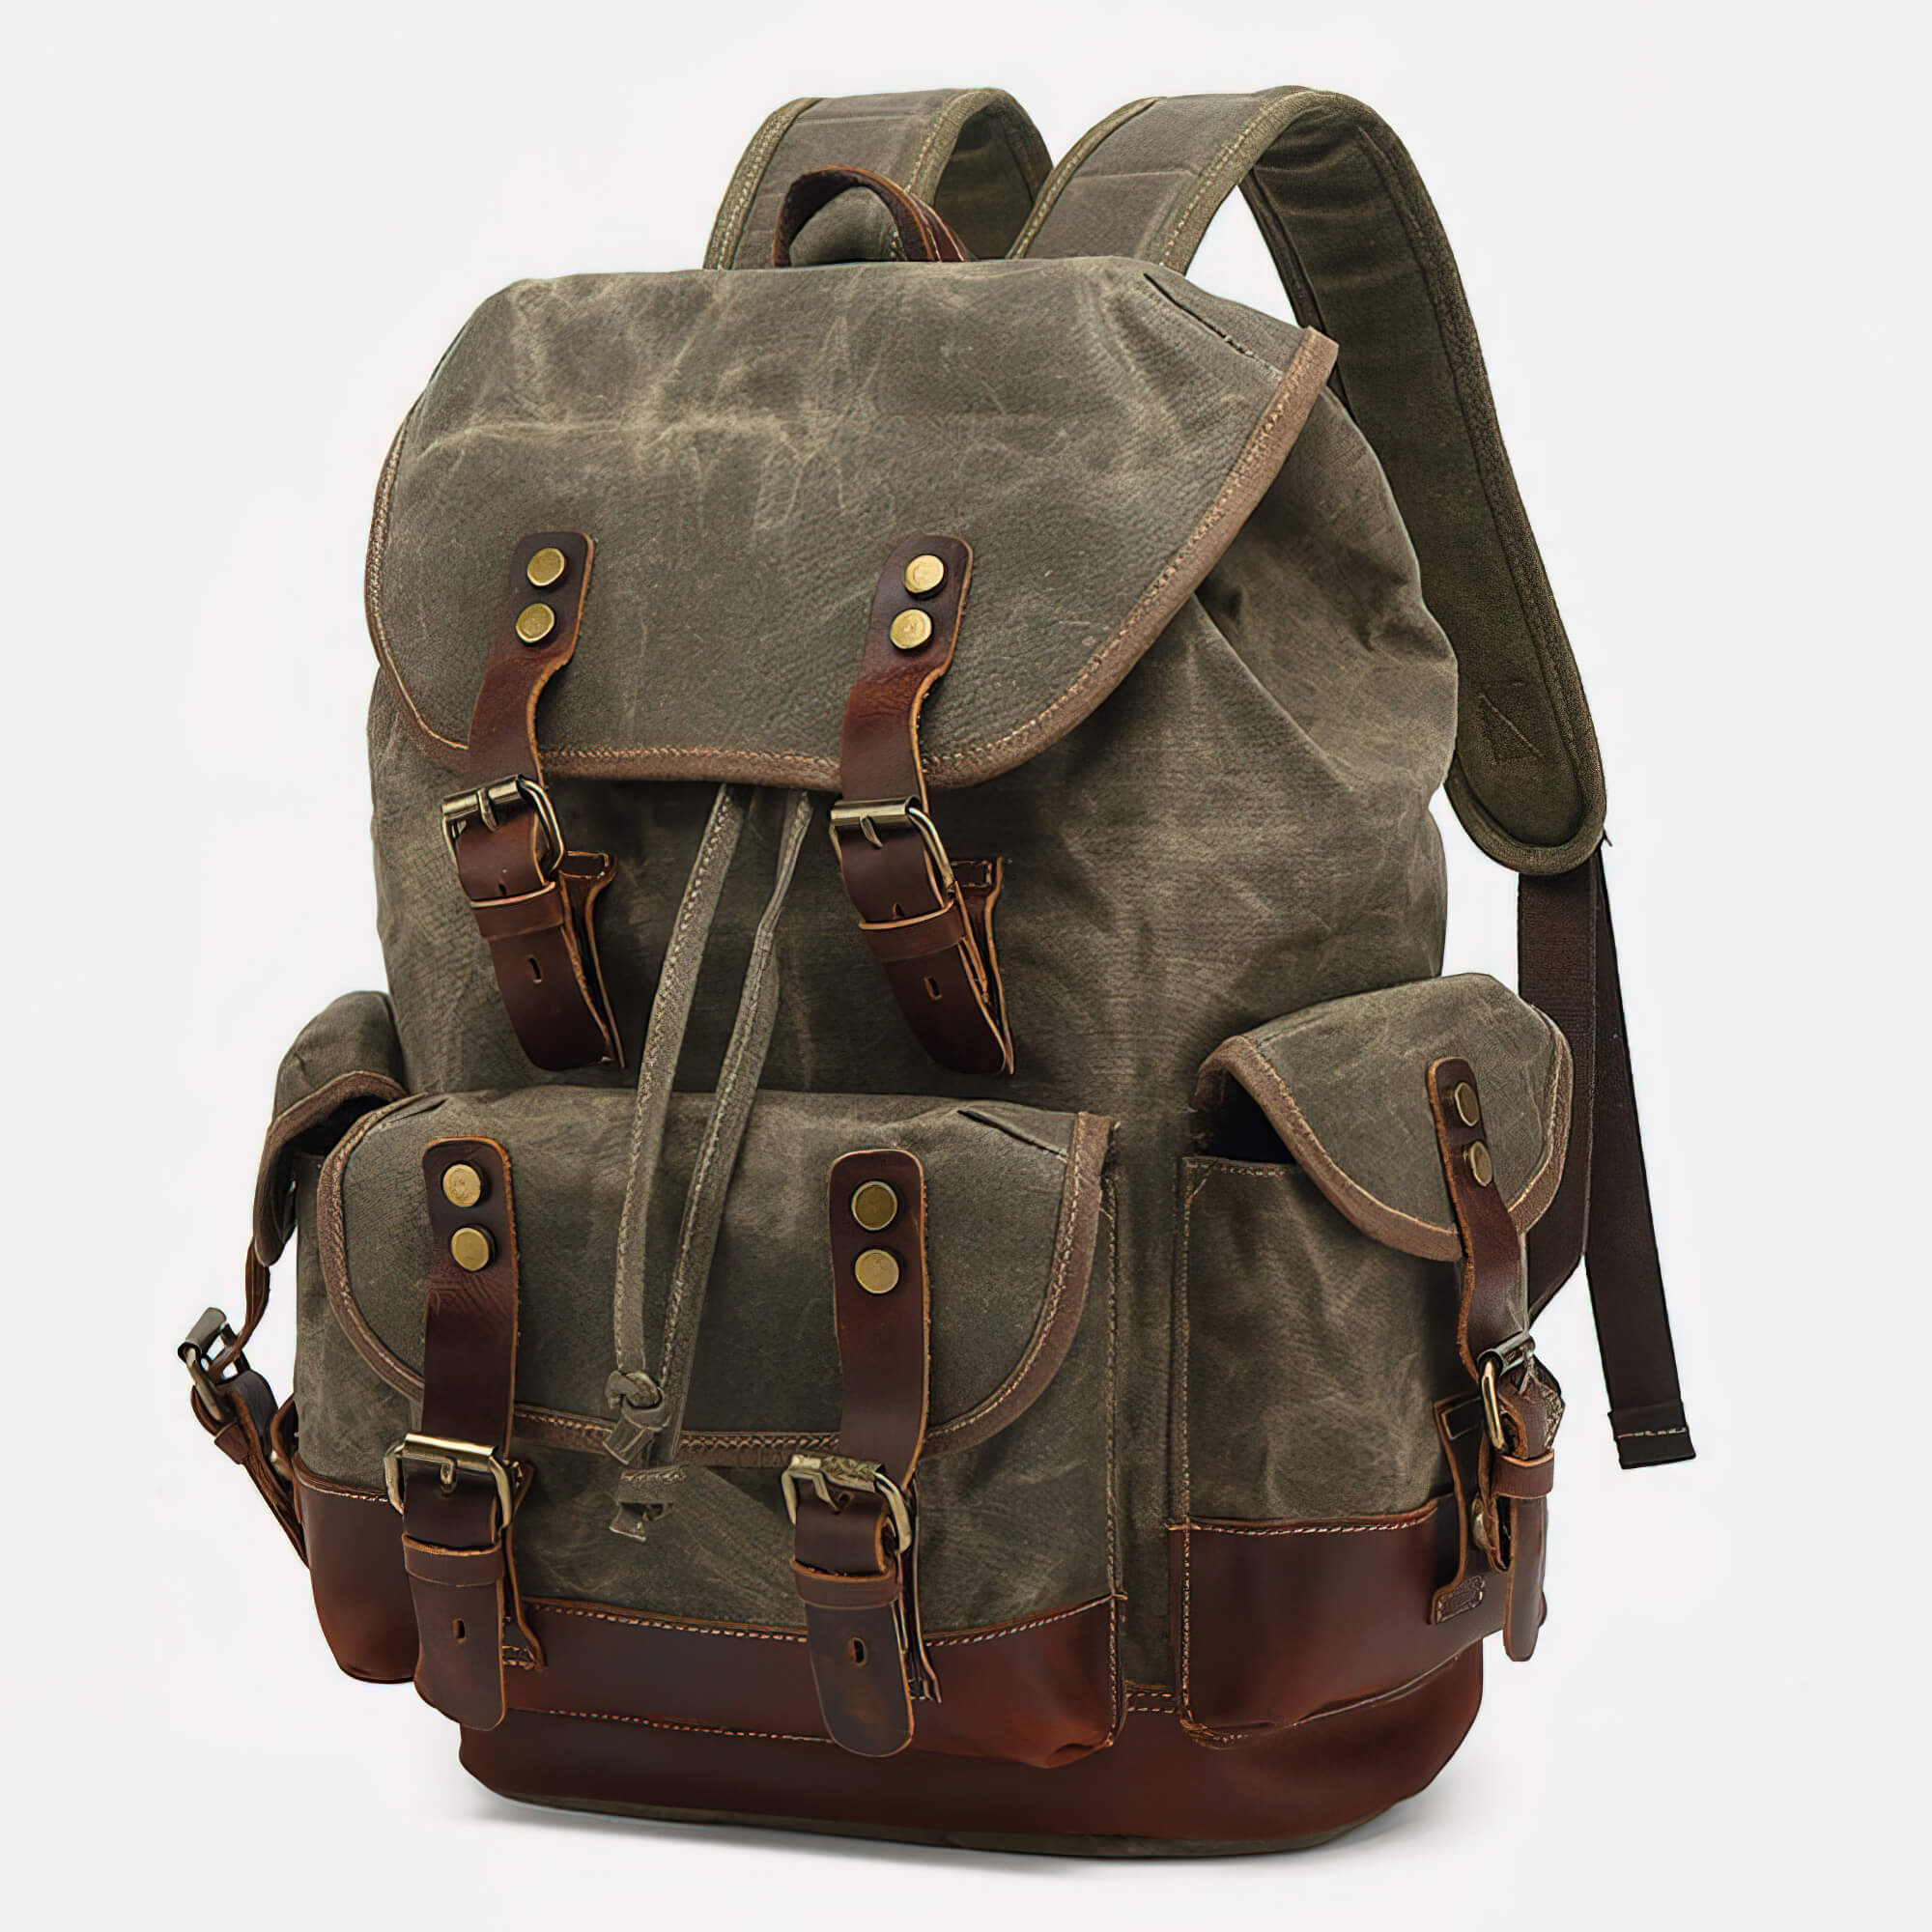 Waxed Canvas Backpack Rucksack 30L - Large Capacity, Genuine Leather ...